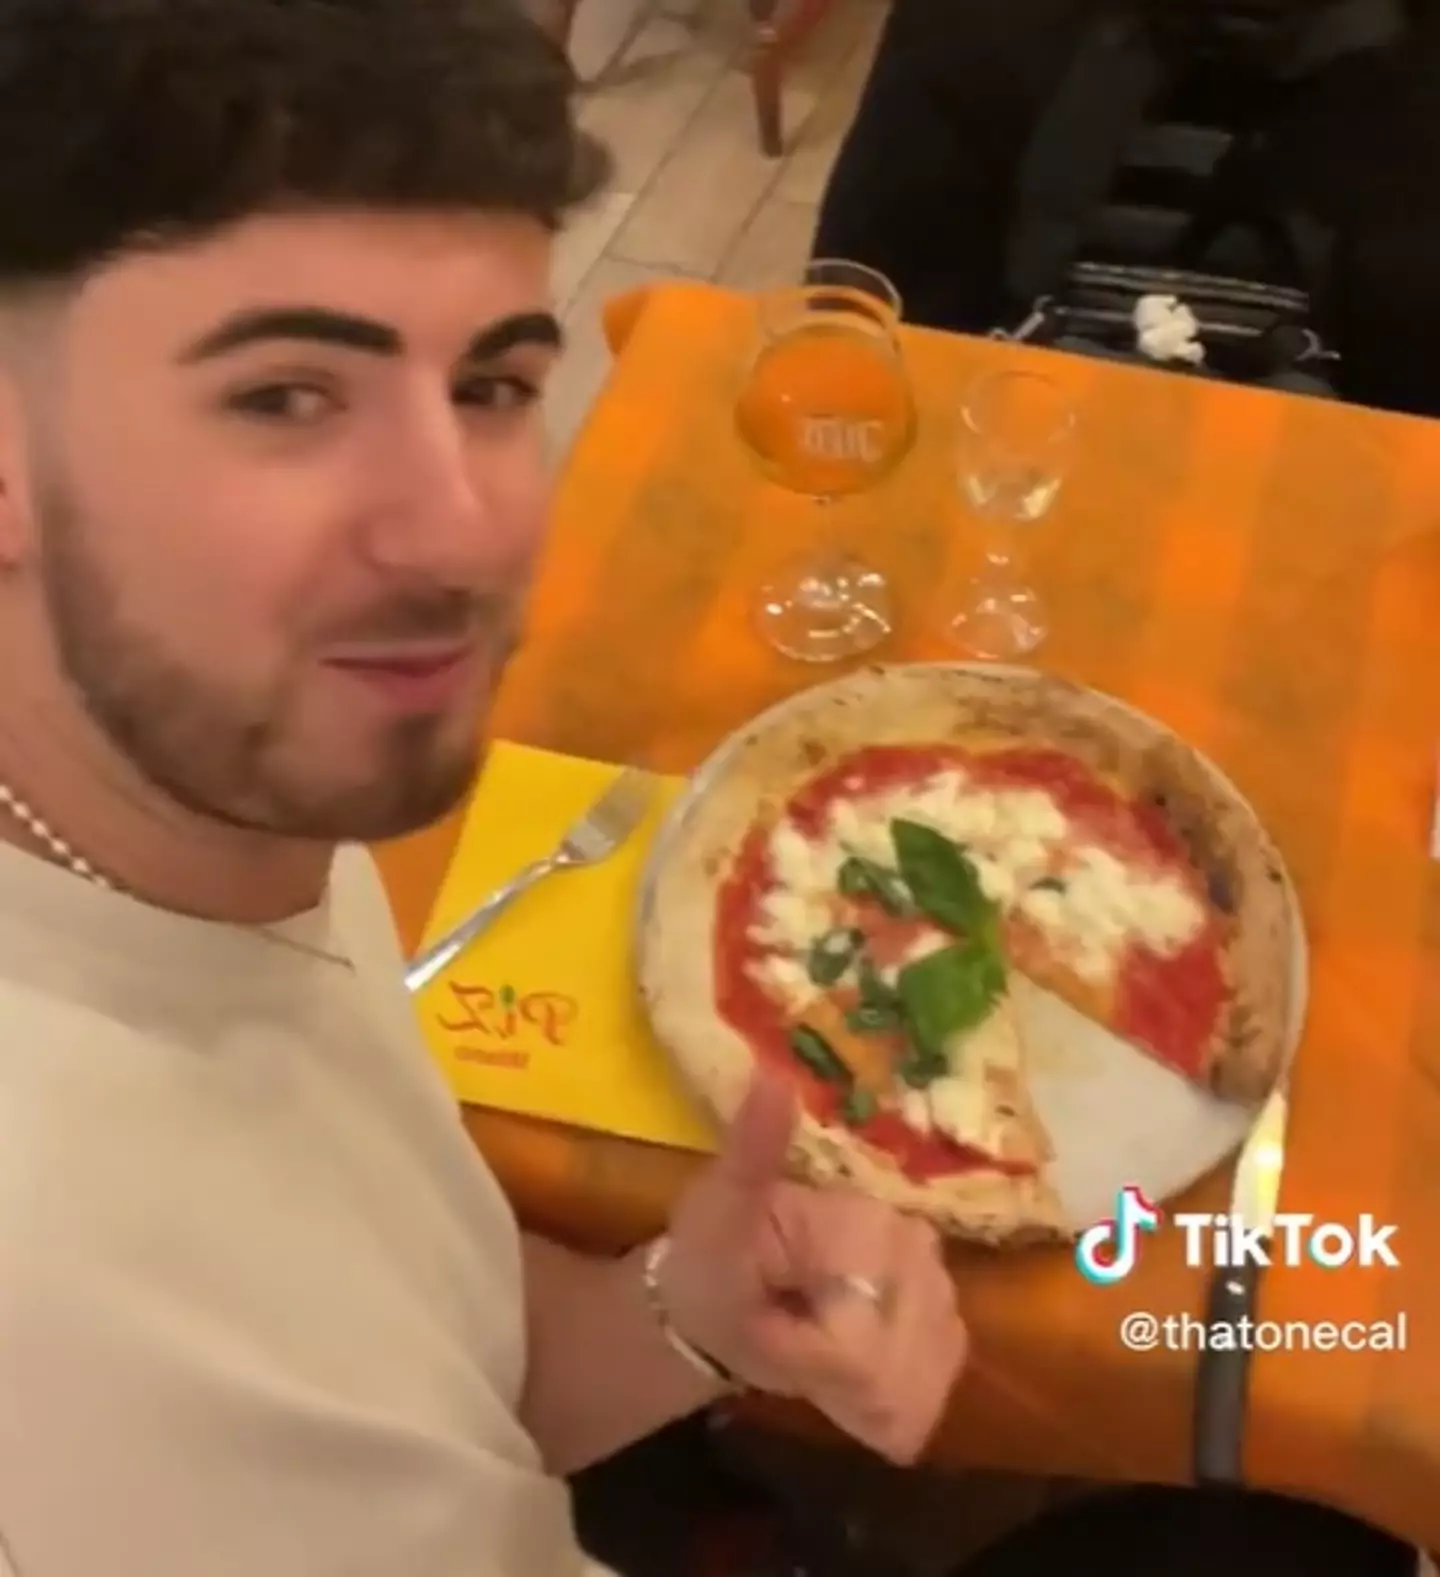 Callum flew to Italy and bought a pizza for less than the price of ordering a Dominos.